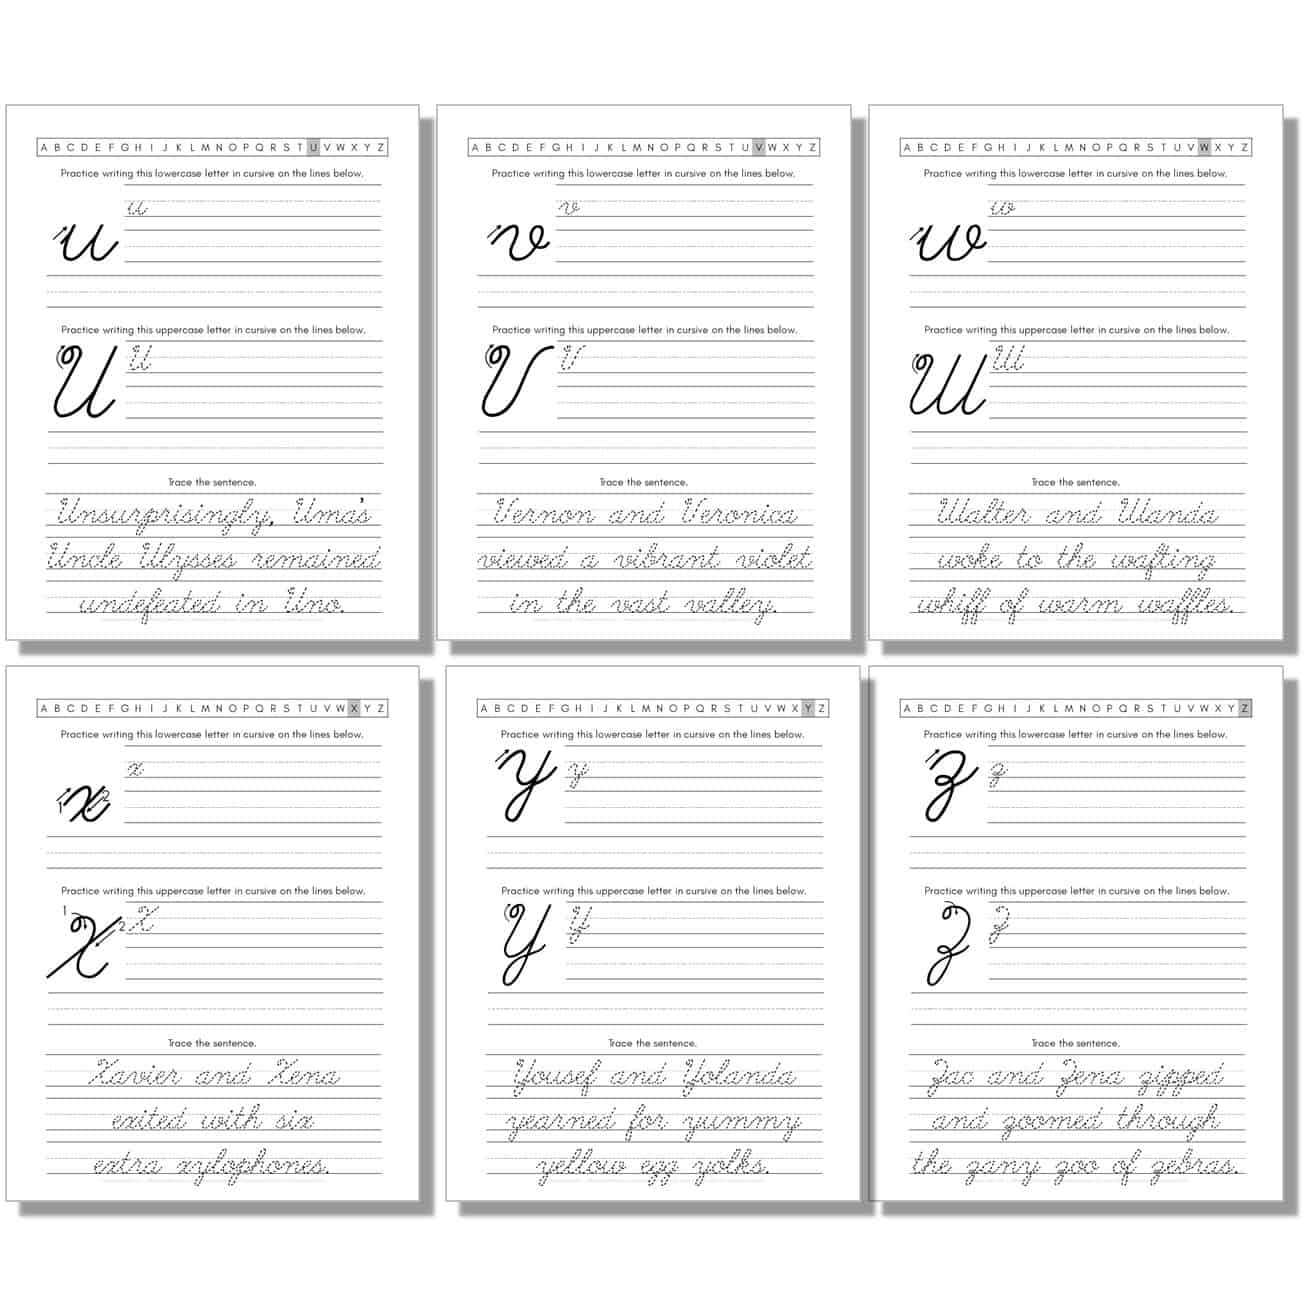 cursive worksheet with uppercase, lowercase letters and sentences for u, v, w, x, y, z.